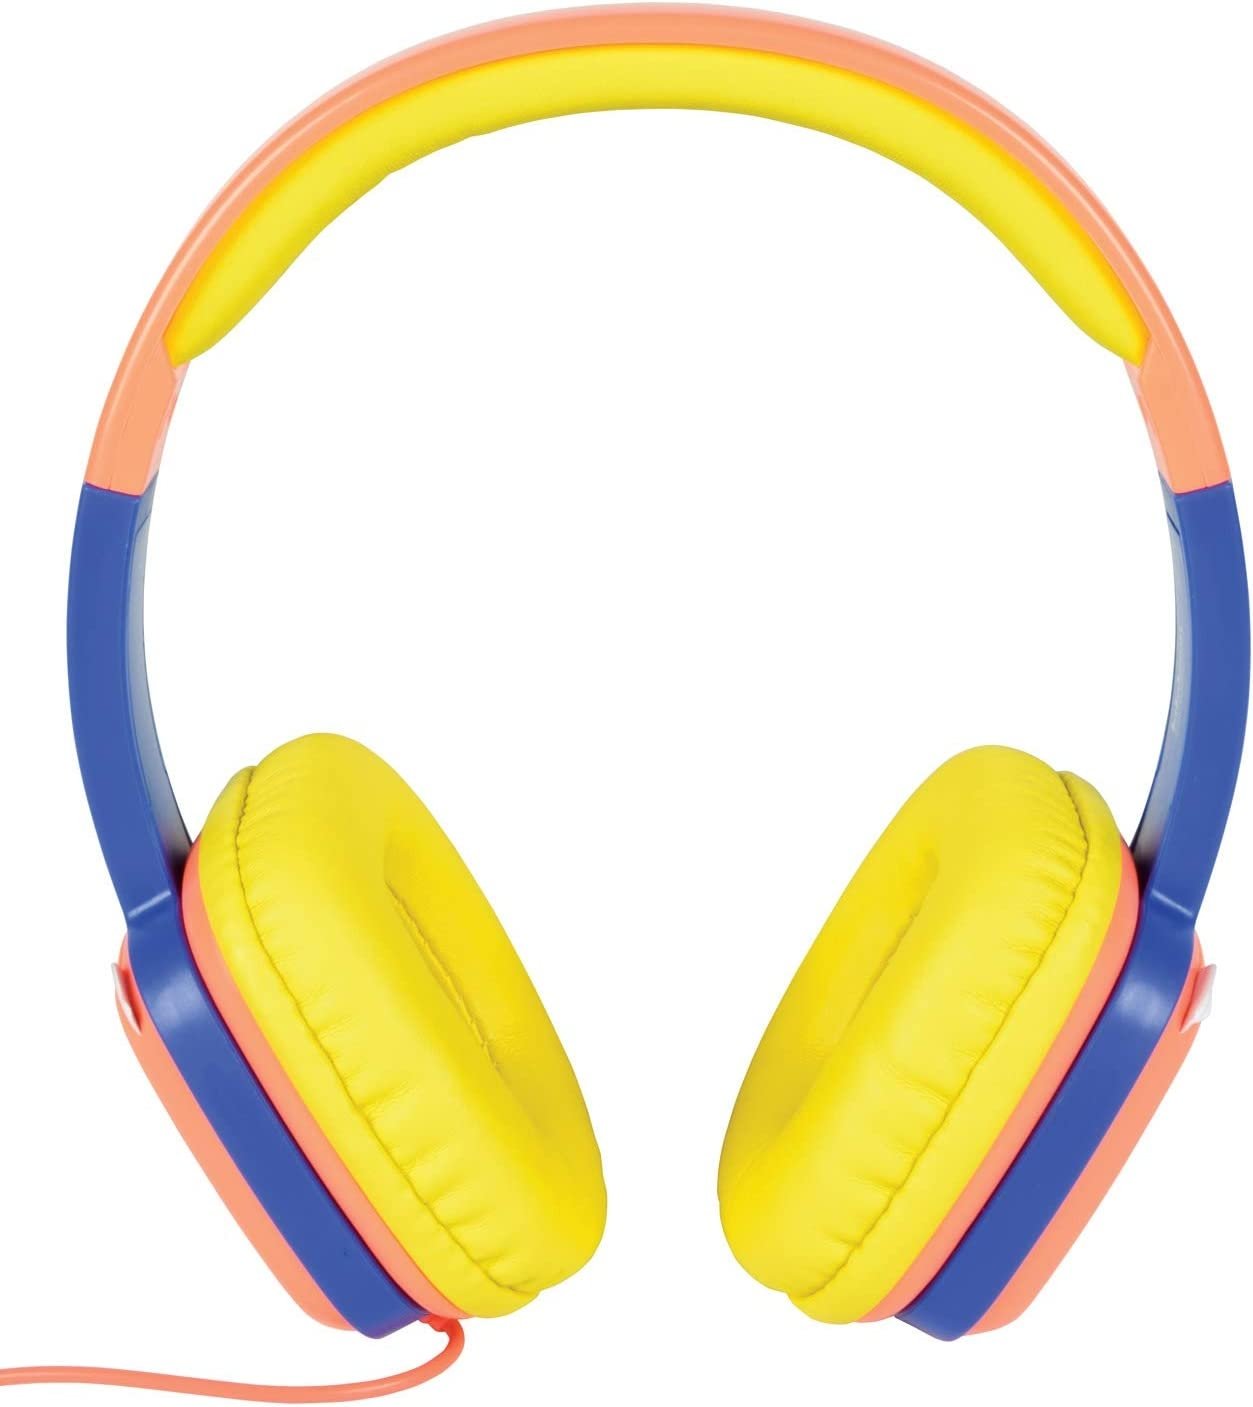 Easi Doodle Children's Headphones, The Easi Doodle Children's Headphones are constructed with durable and bendable, child friendly materials, these funky, colourful headphones feature a pillow soft headband and ear cushions that provide comfort for longer listening sessions. The volume is limited to 85 decibels, preventing the device from exposing young listeners’ ears to permanently damaging sound levels. Their coolest feature is the ability to customise the earcups. Pre-printed cards are provided that can